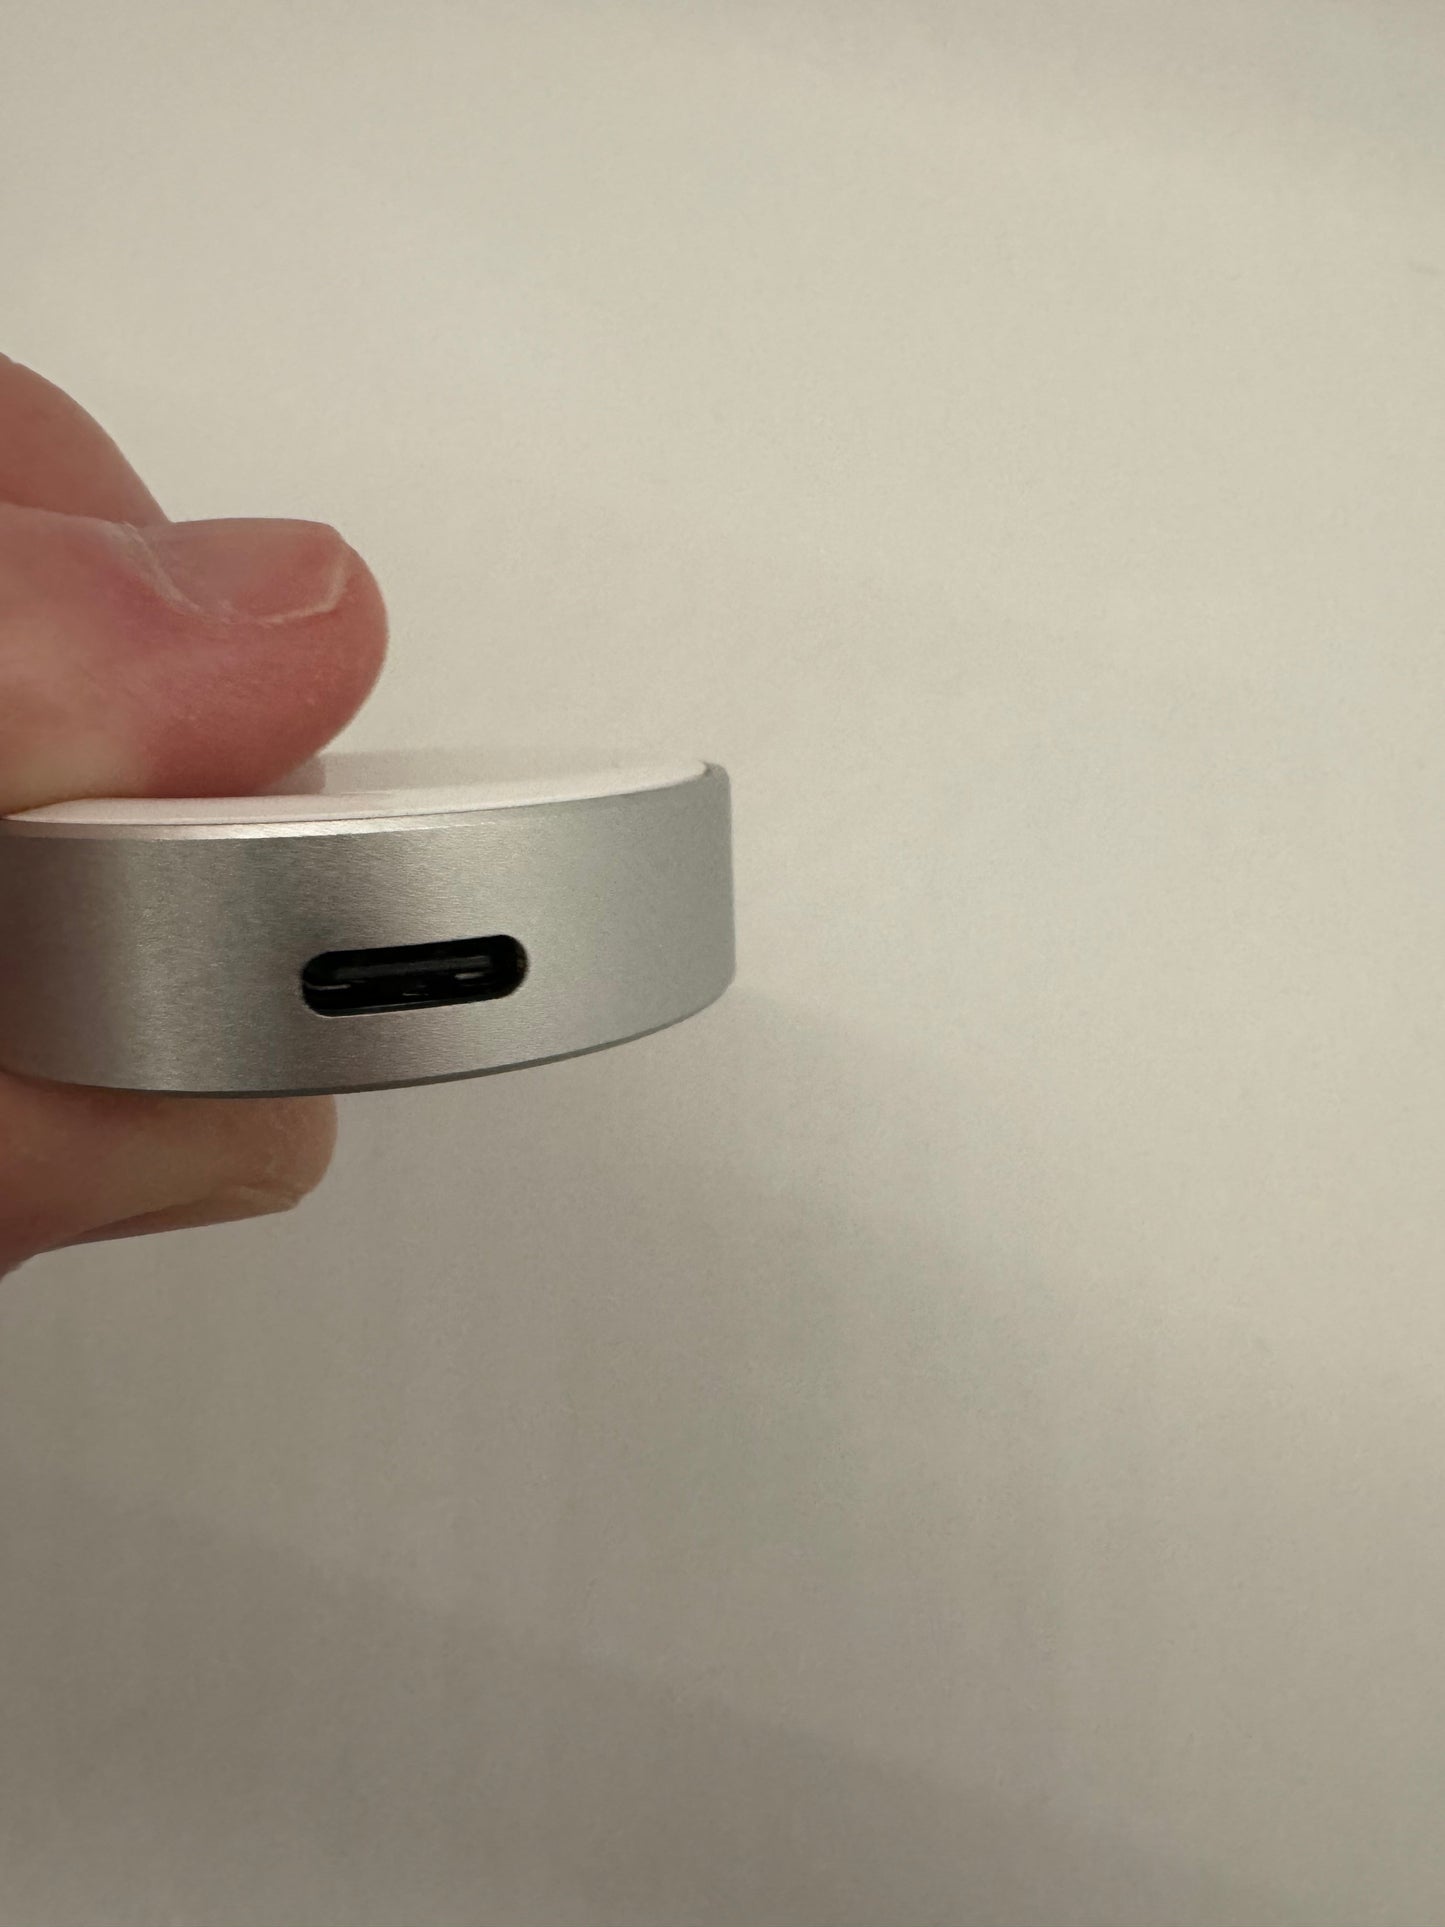 The picture shows a close-up of someone's hand holding a small, round, silver object. The object appears to be made of metal and has a USB-C port on its side. The background is plain and white.